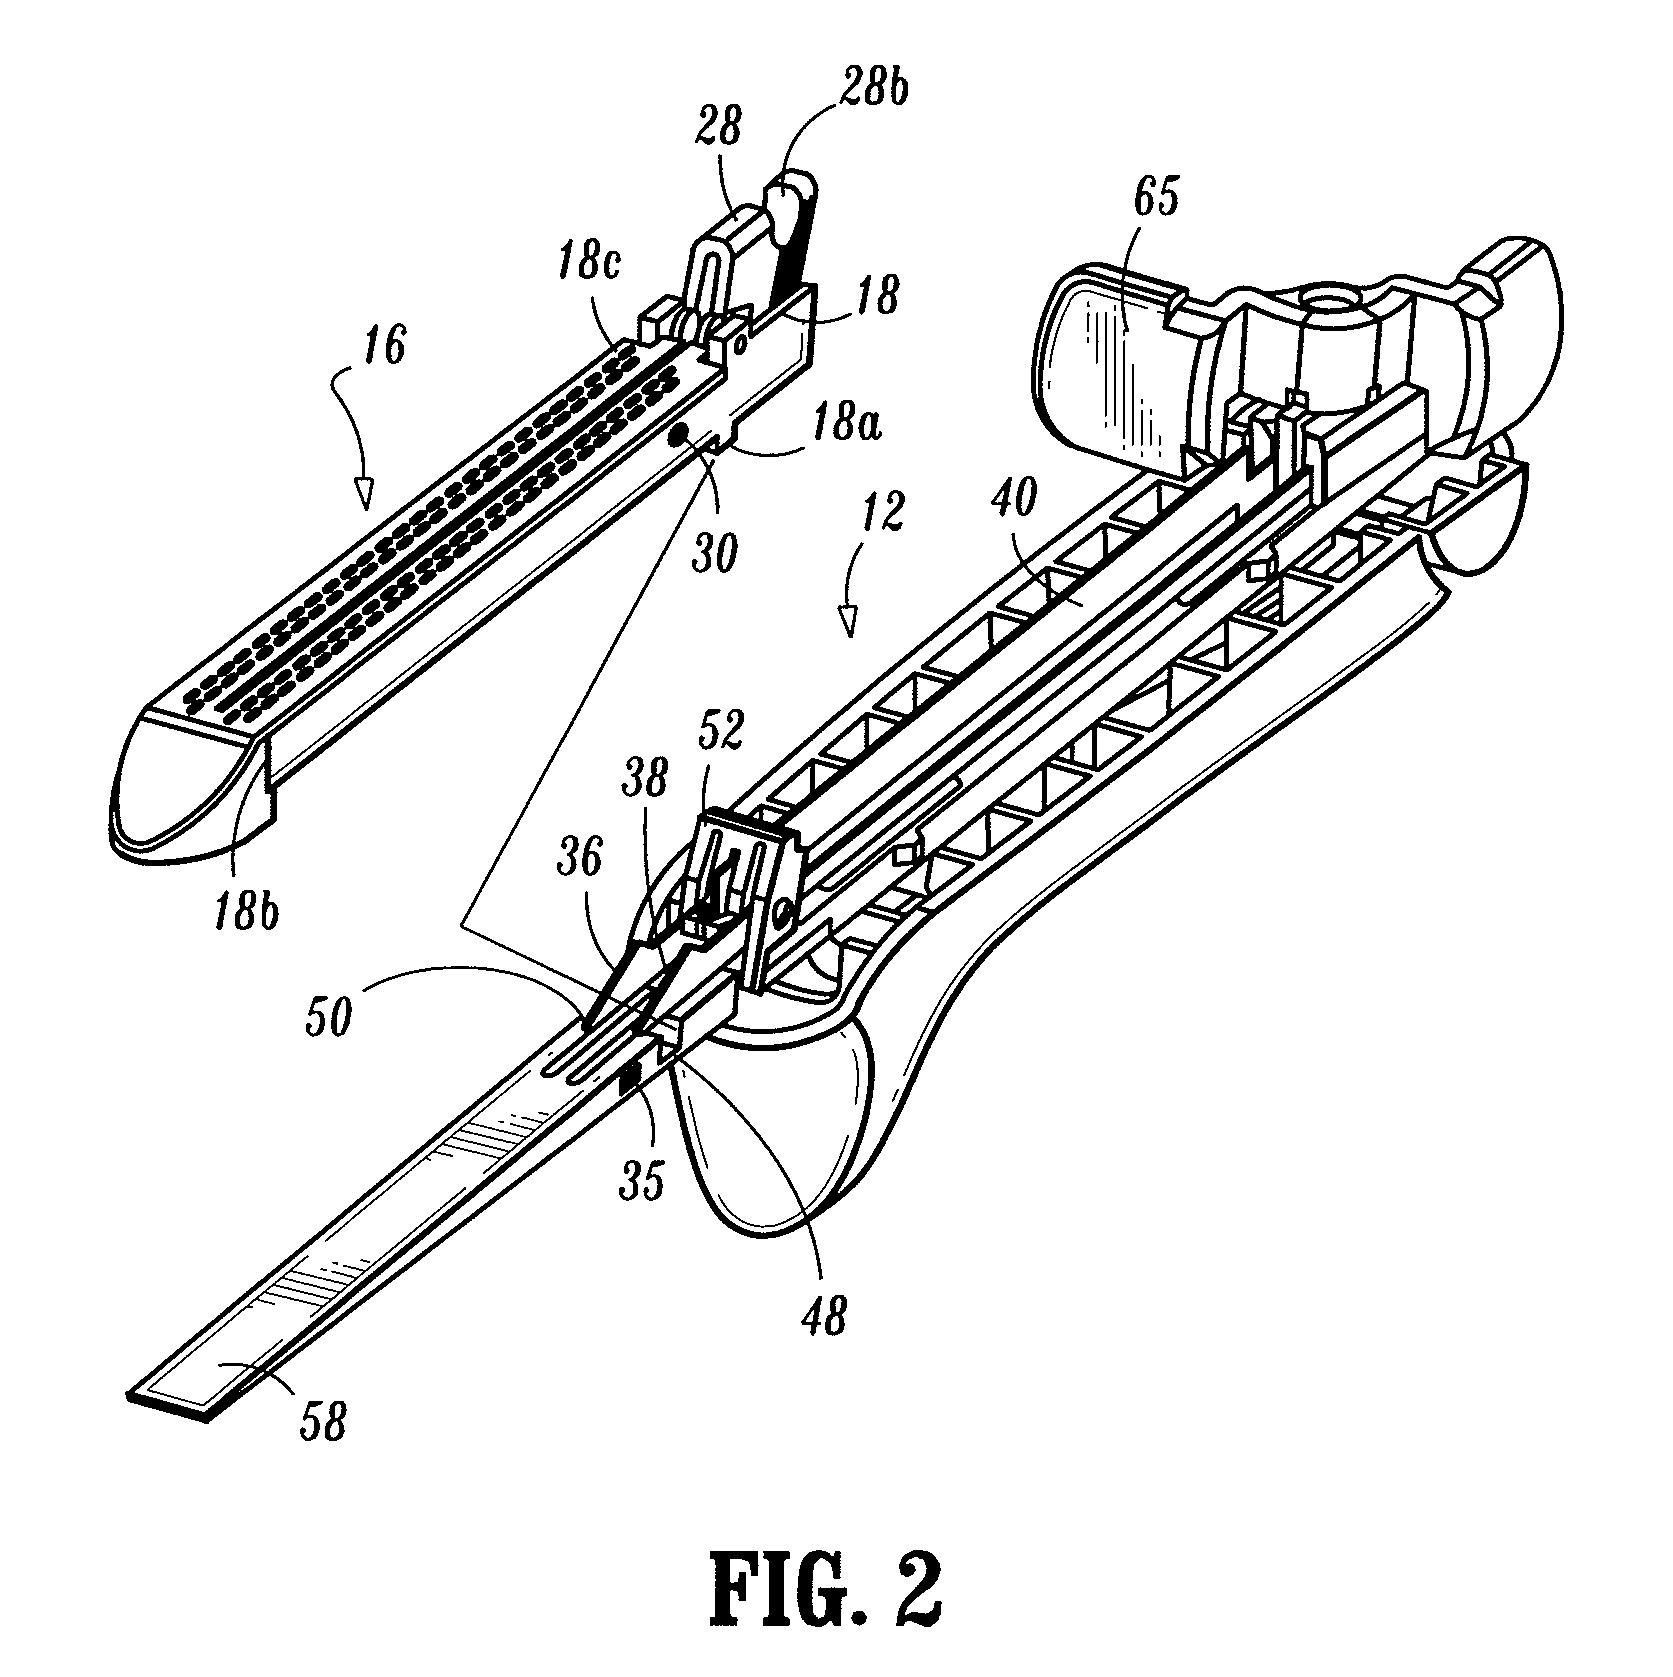 Recognition of interchangeable component of a device